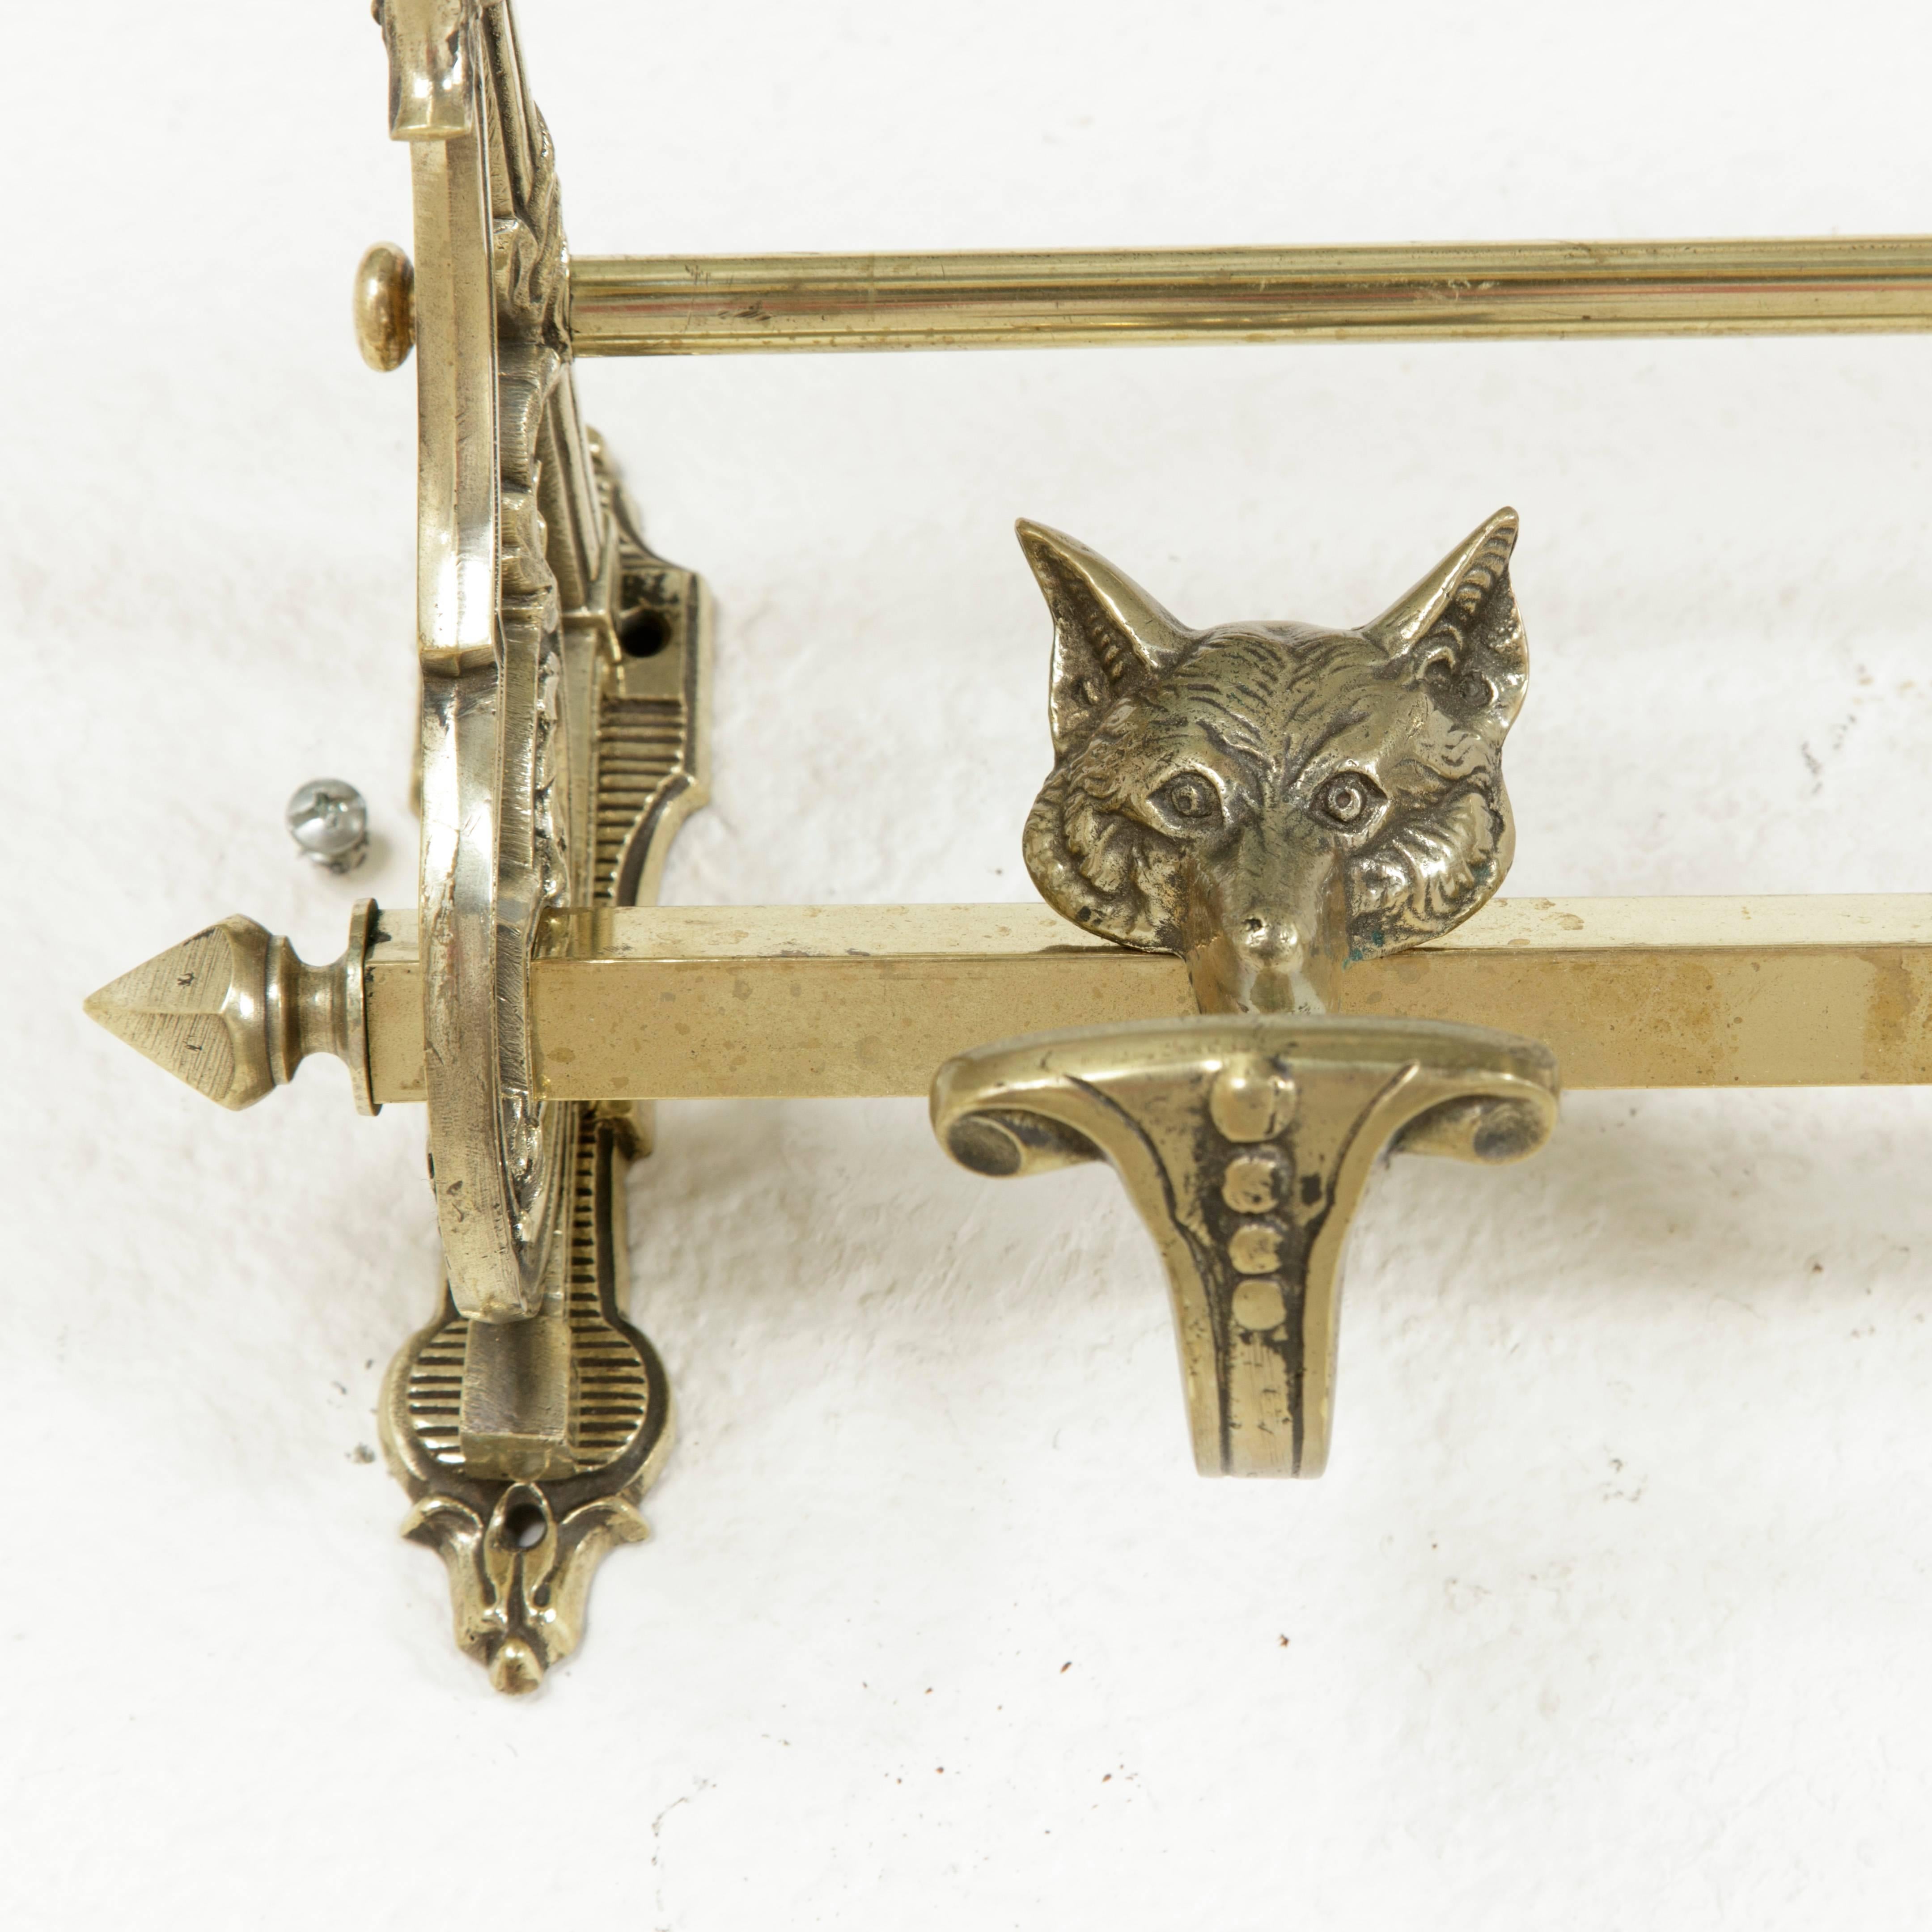 20th Century French Artisan-Made Brass Hat and Coat Rack with Four Hooks Featuring Fox Heads